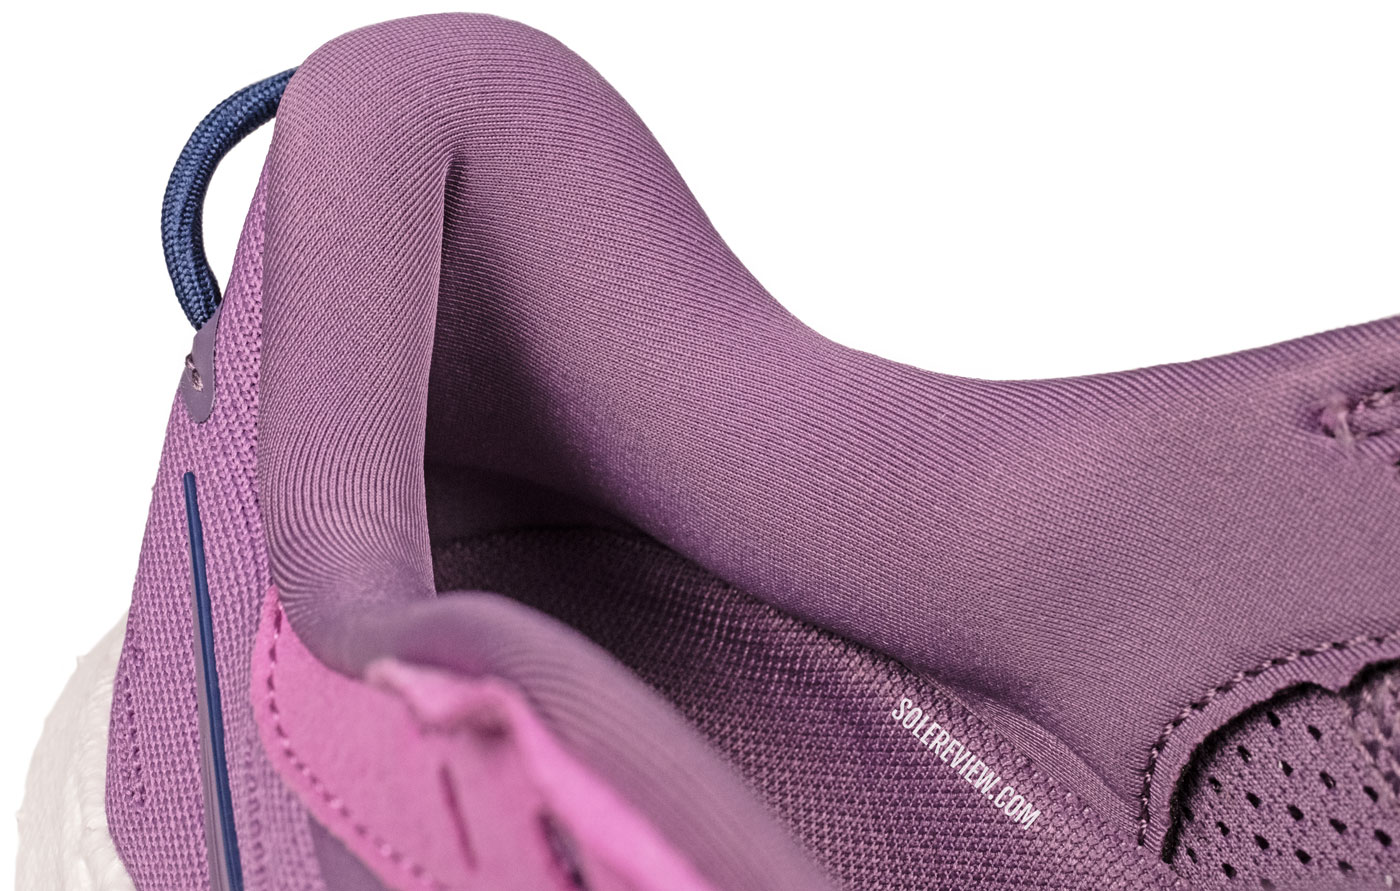 The heel collar of the Saucony Triumph 21.